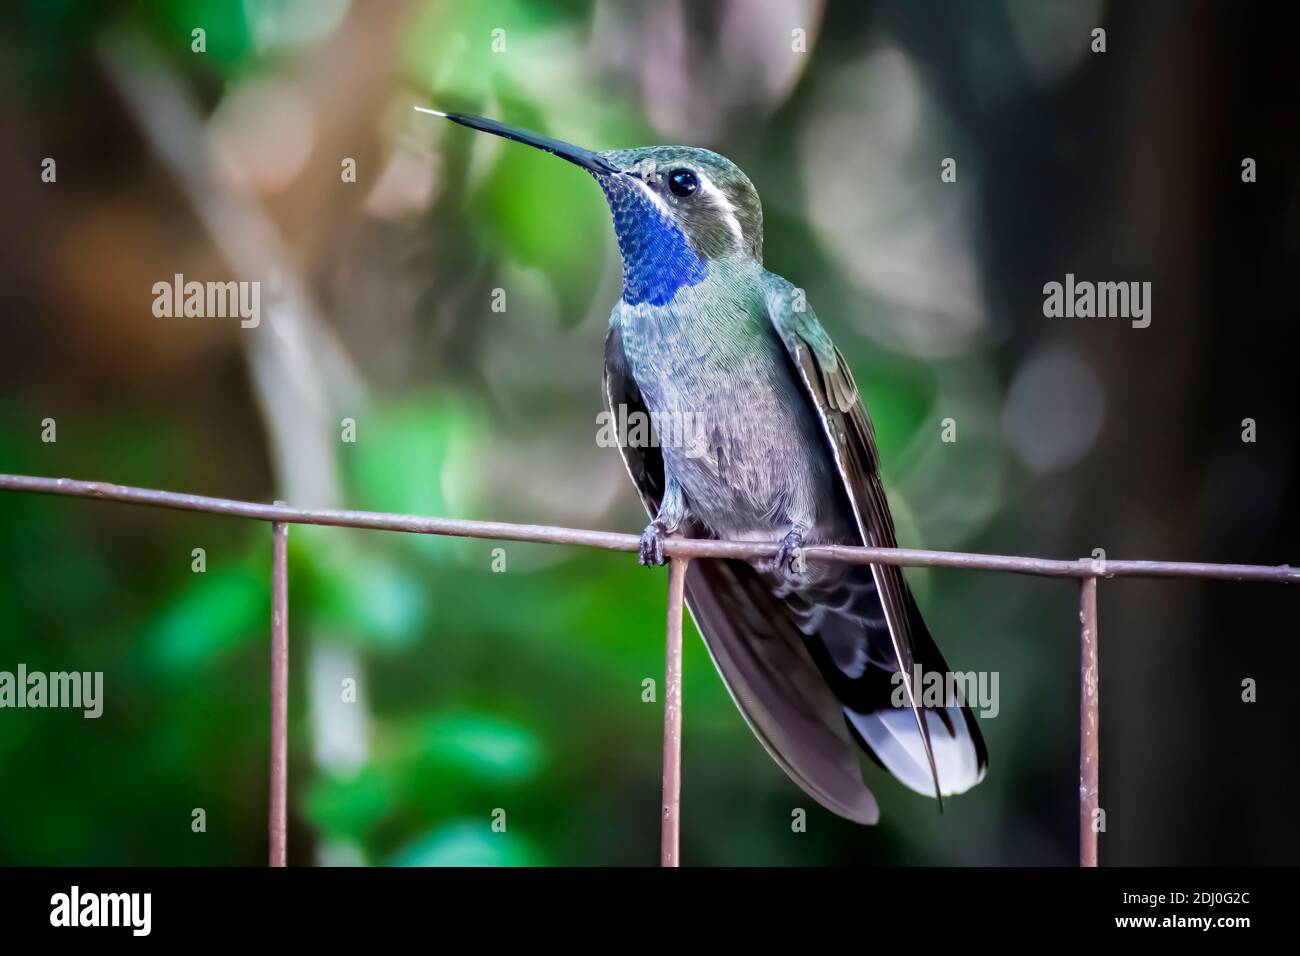 Blue-throated hummingbird with tongue sticking out of beak perched on wire fence close up profile. Stock Photo